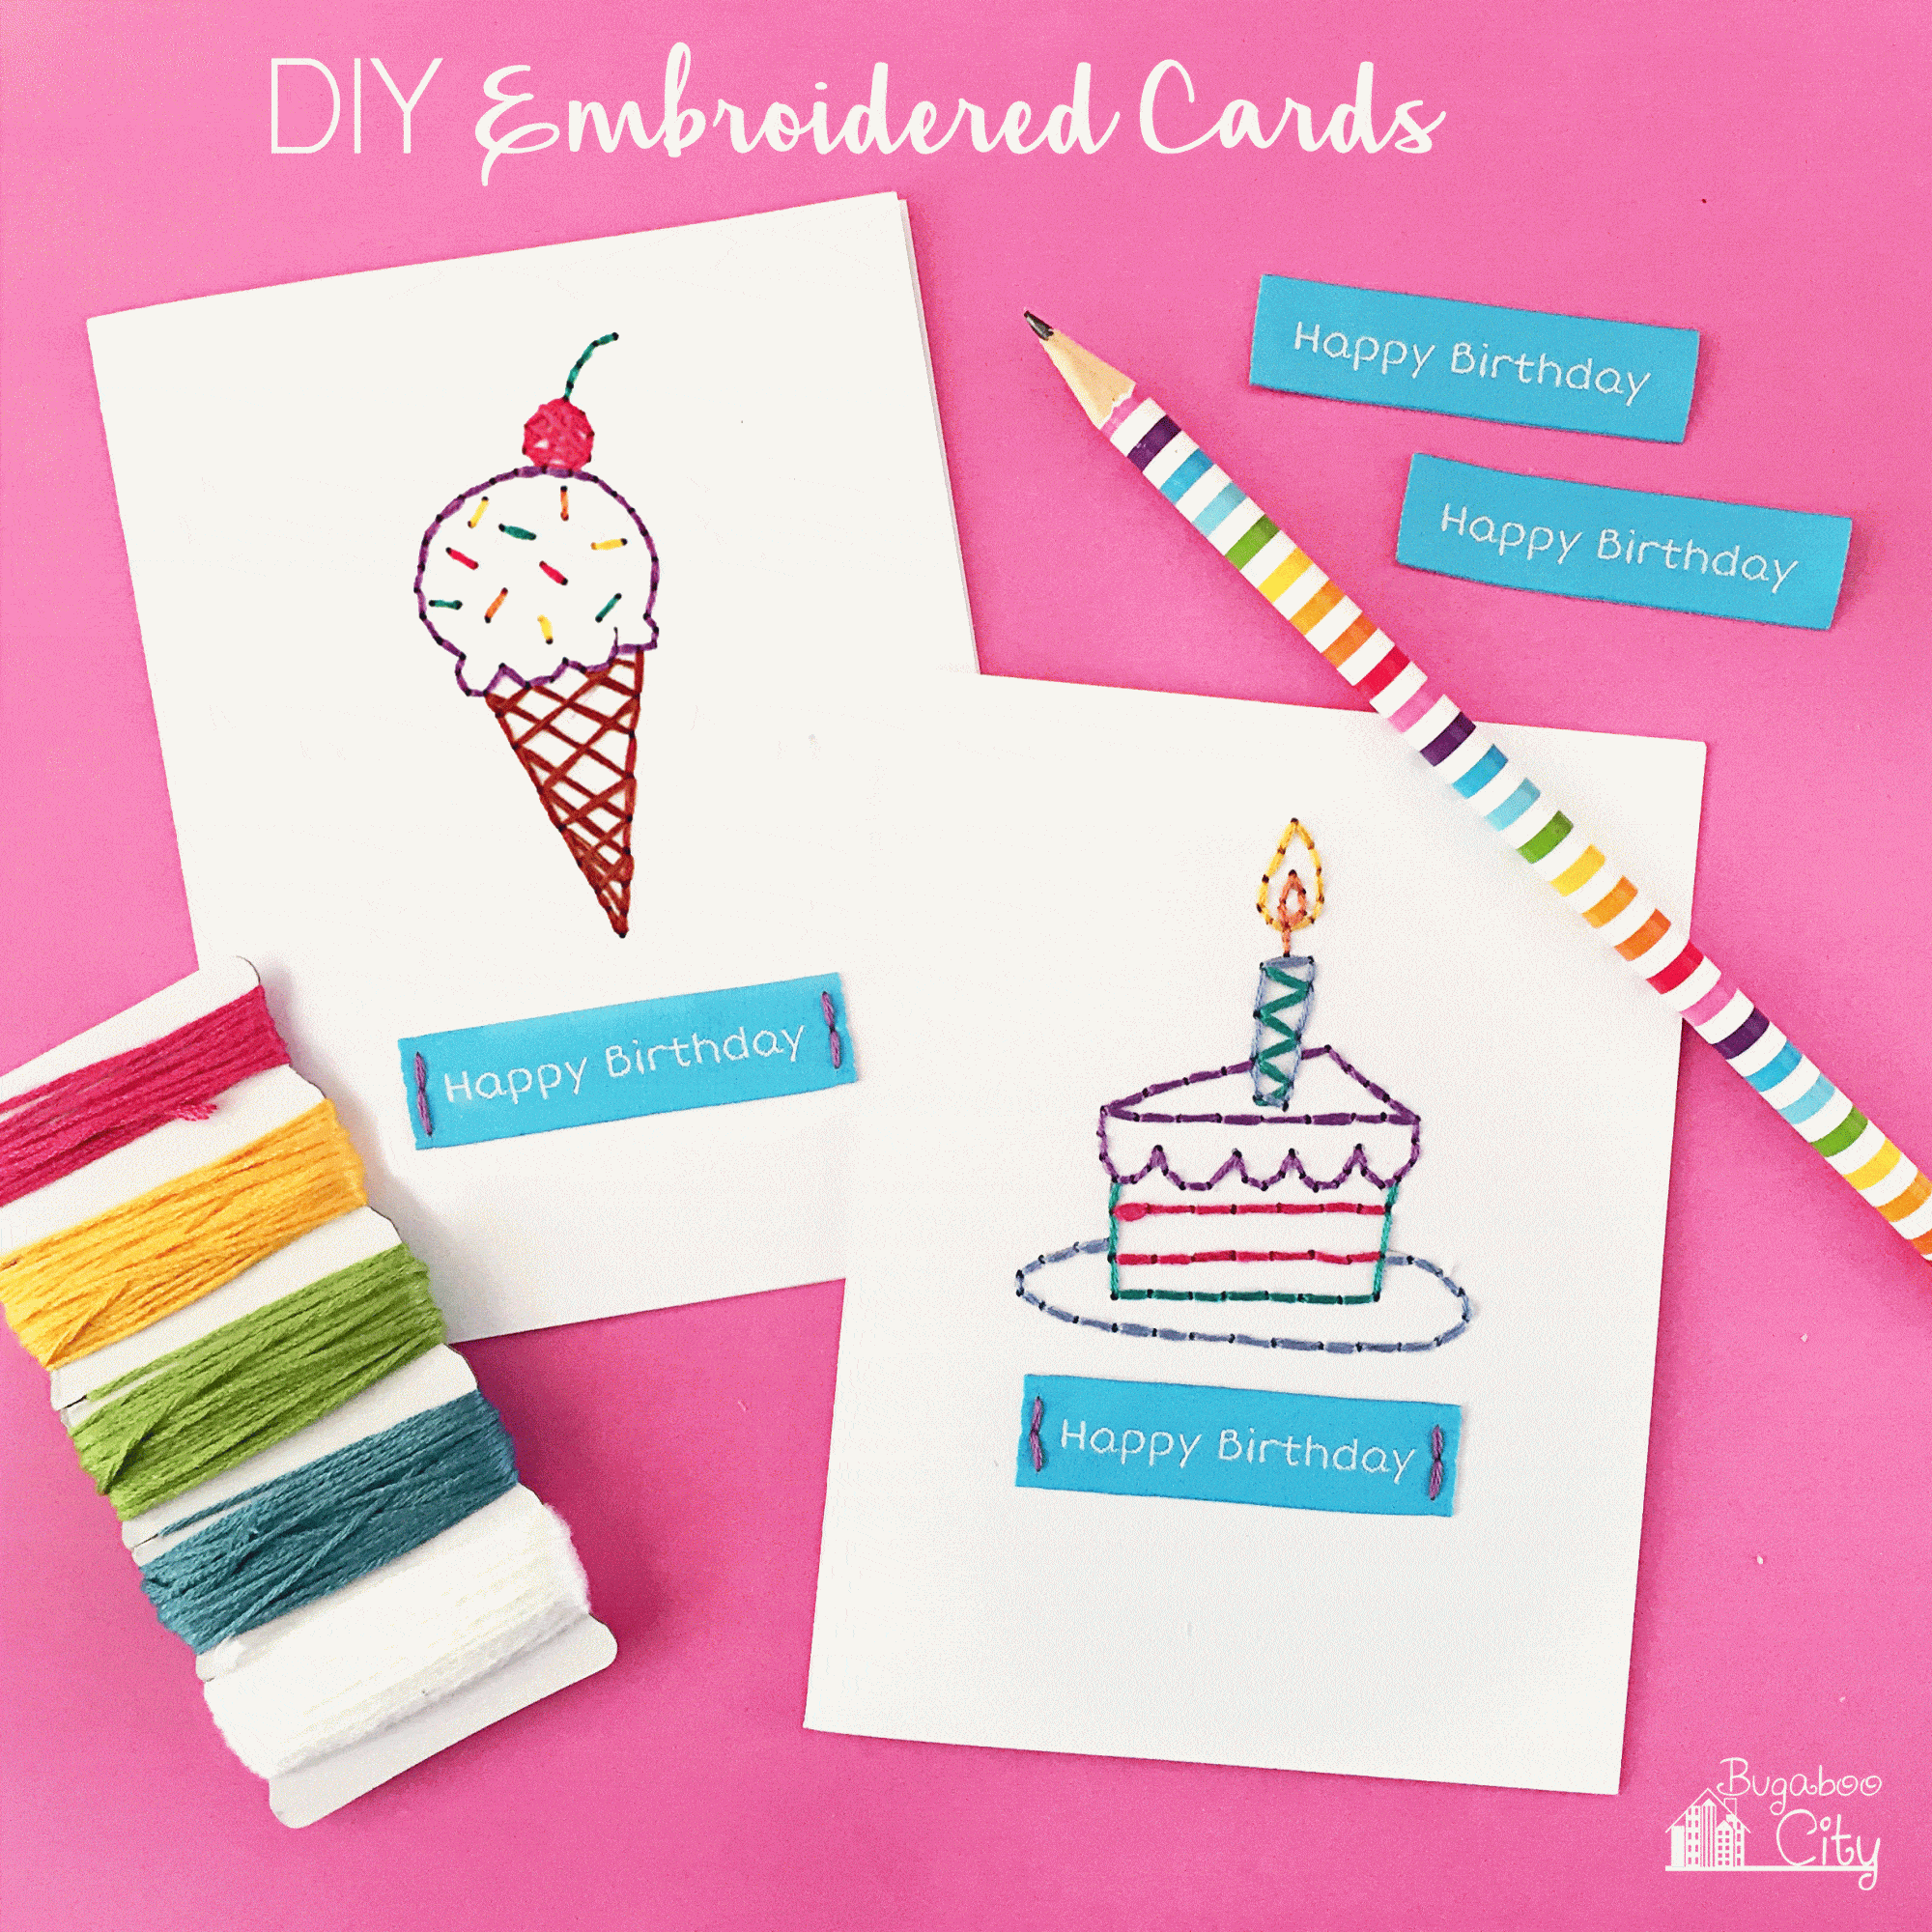 Hand embroidered birthday cards